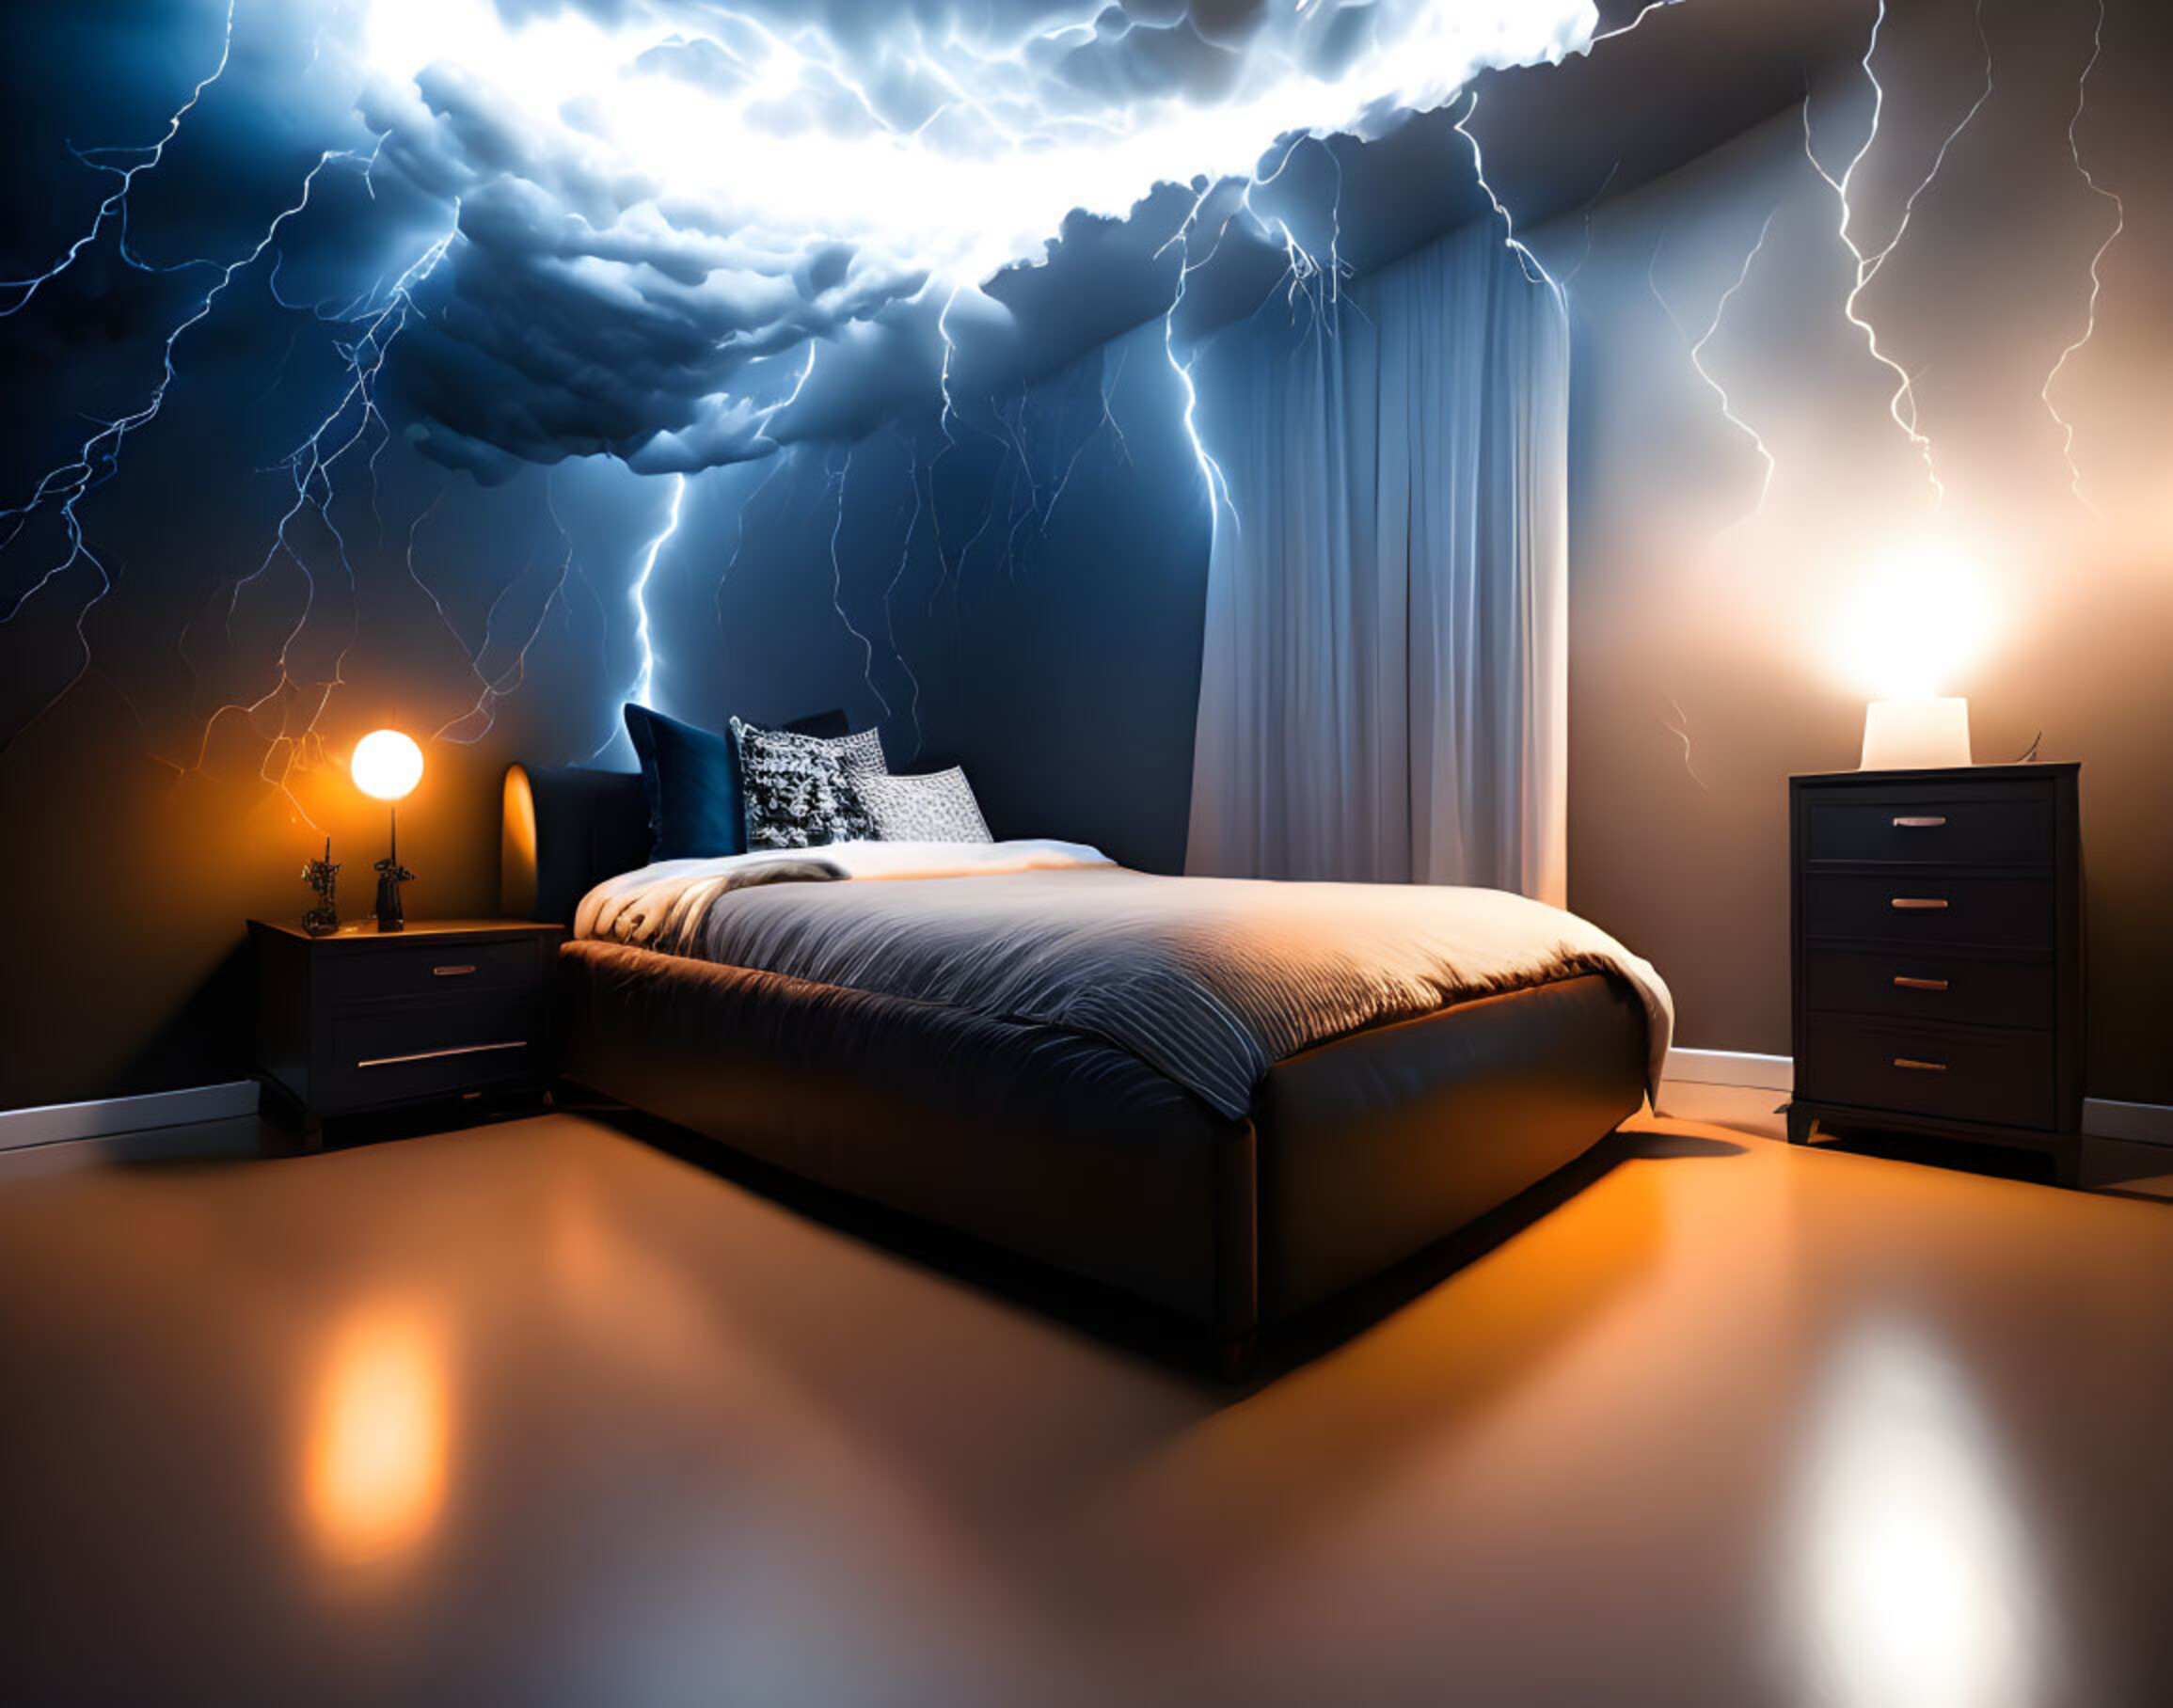 Free photo Thunderclouds in the bedroom above the bed.